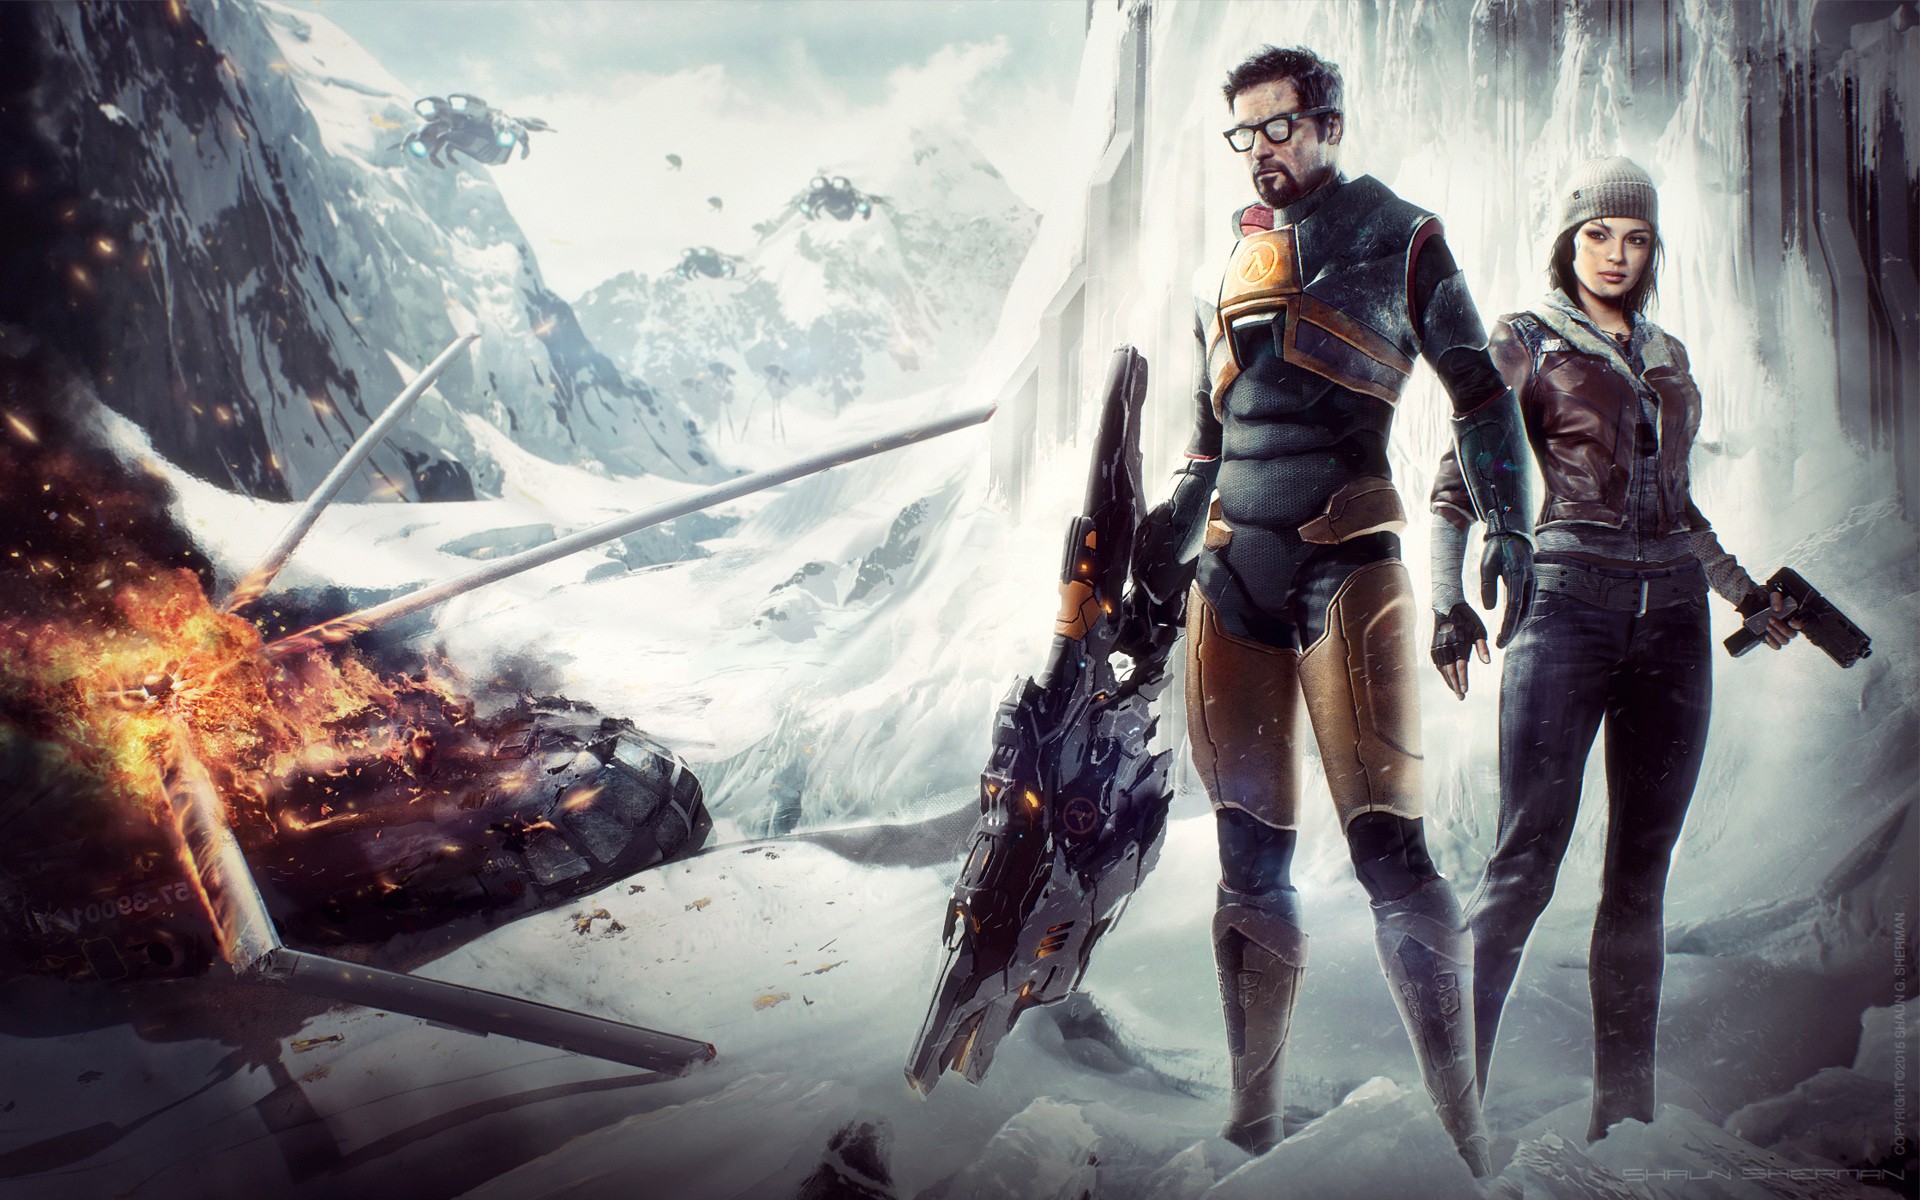 General 1920x1200 Half-Life 2 video games artwork Half-Life Gordon Freeman Alyx Vance video game men video game girls girls with guns video game characters science fiction helicopters wreck mountains